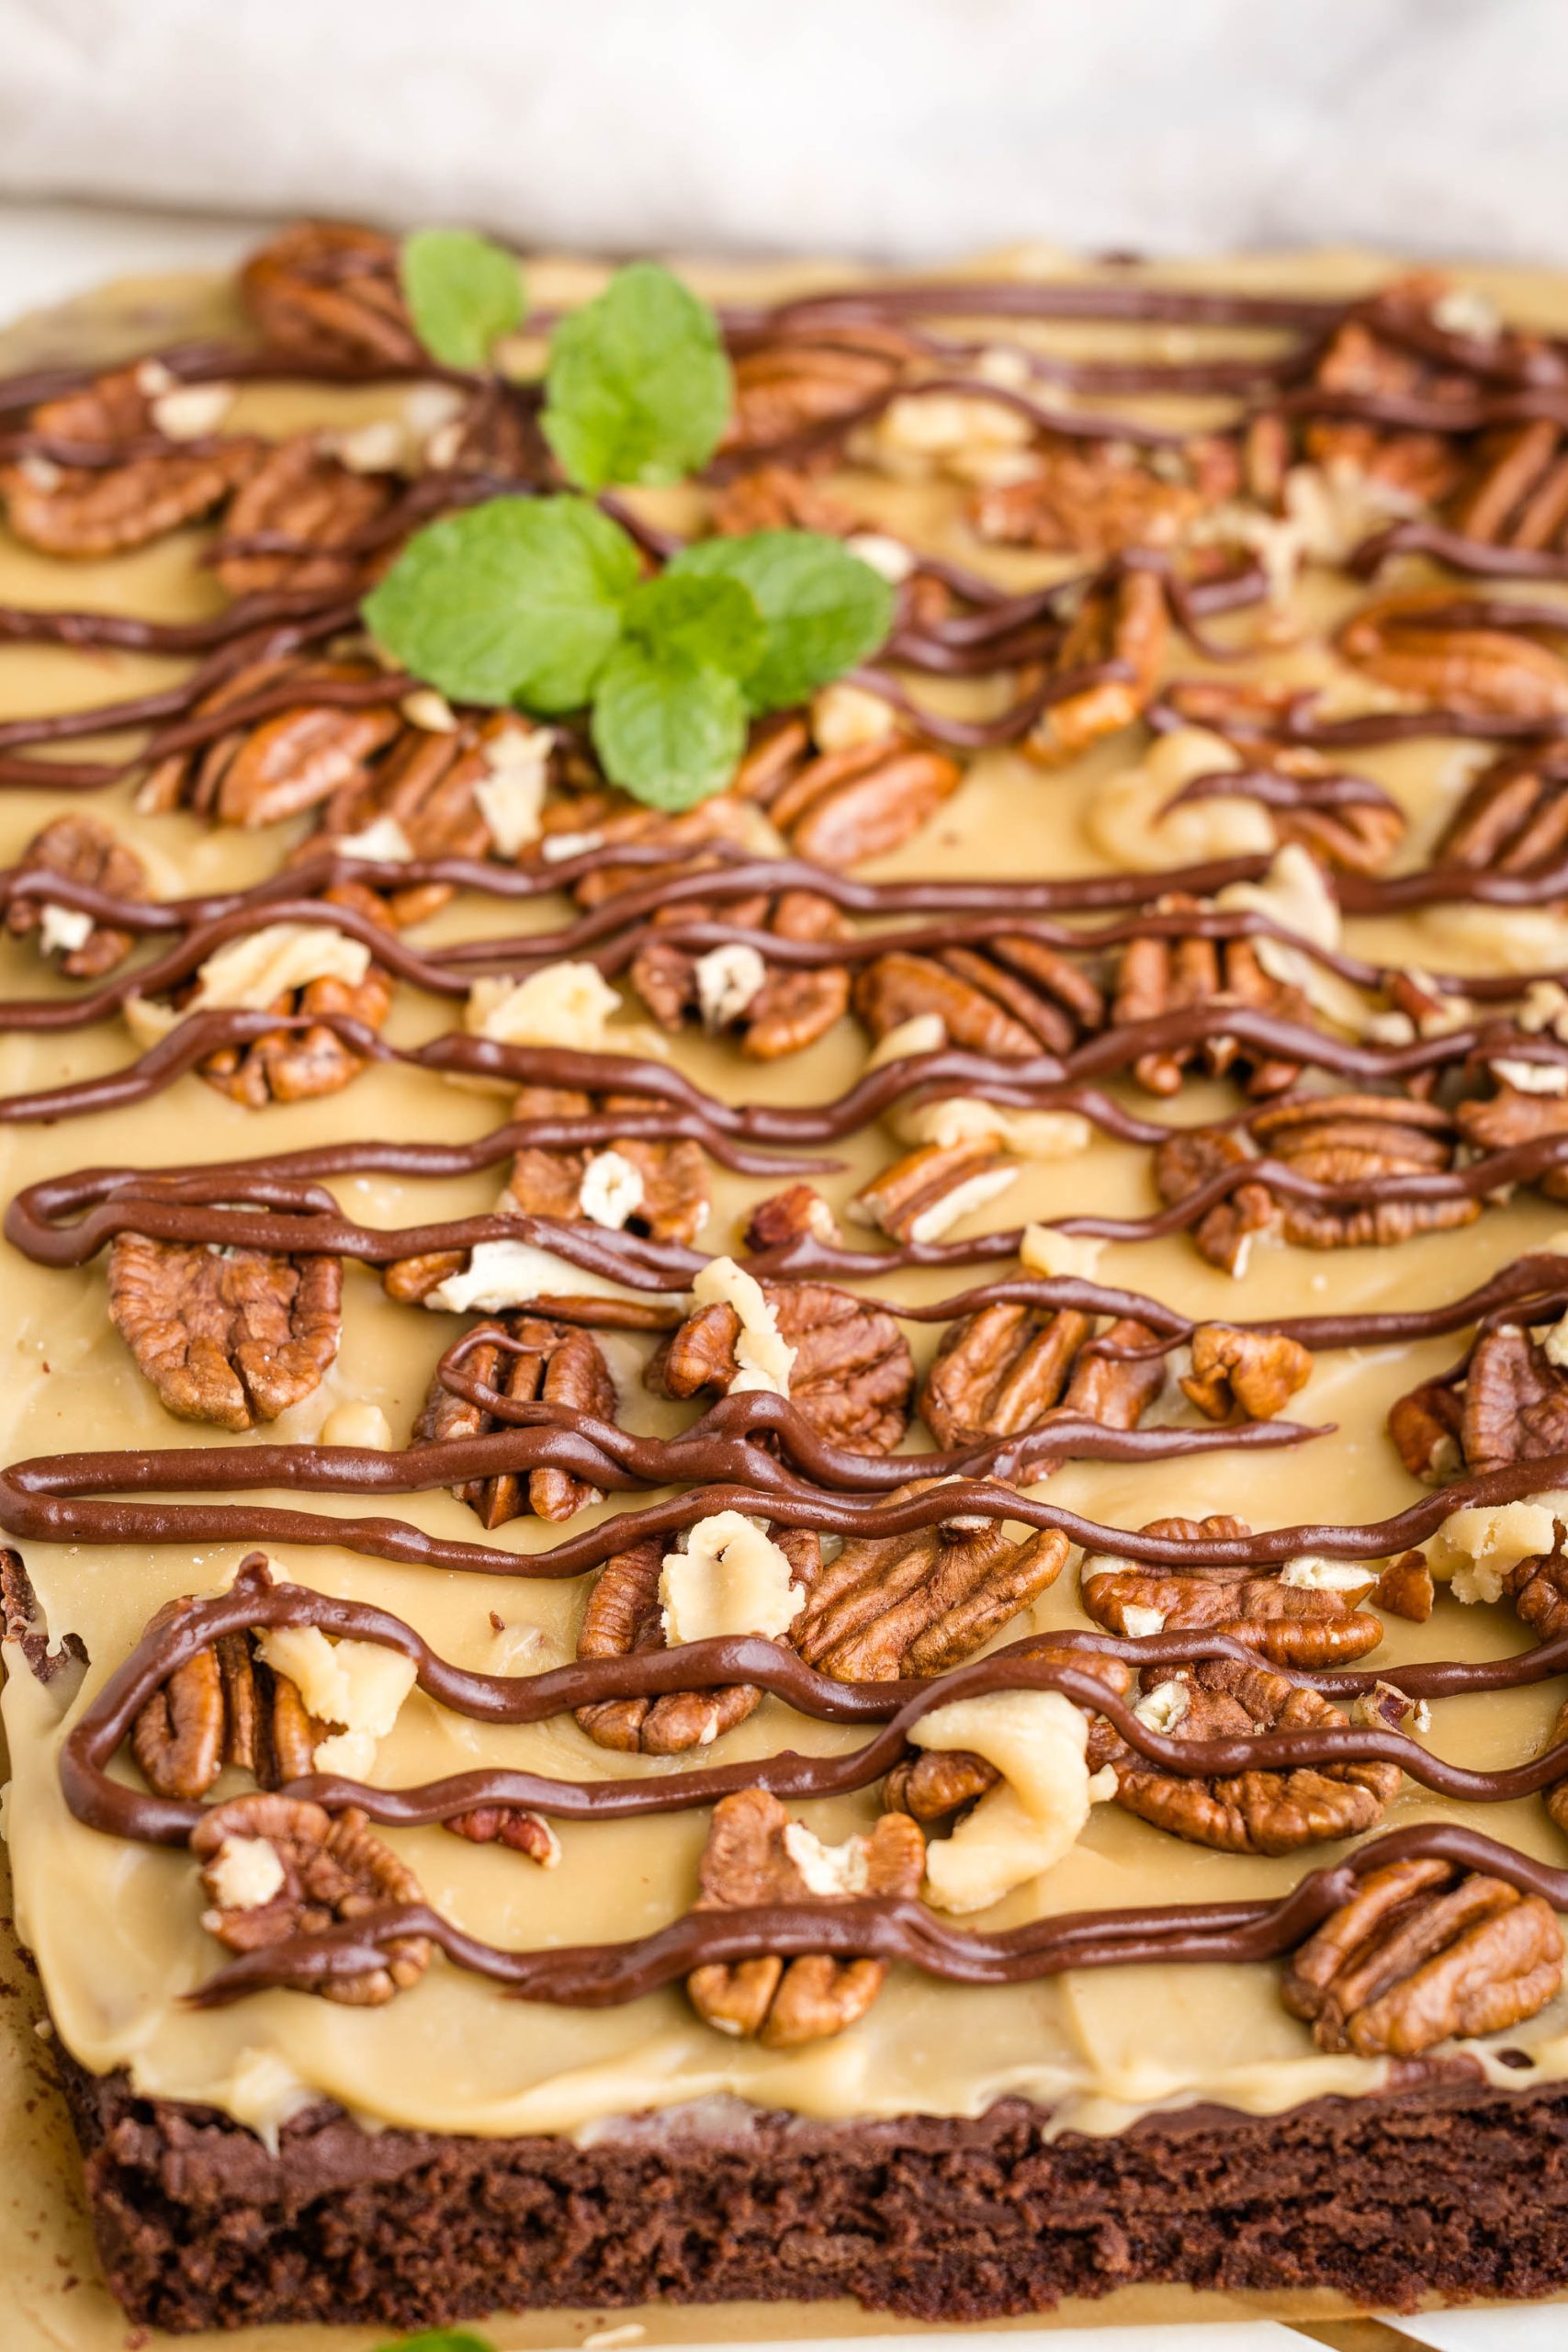 A chocolate praline brownie with pecans and mint on top.